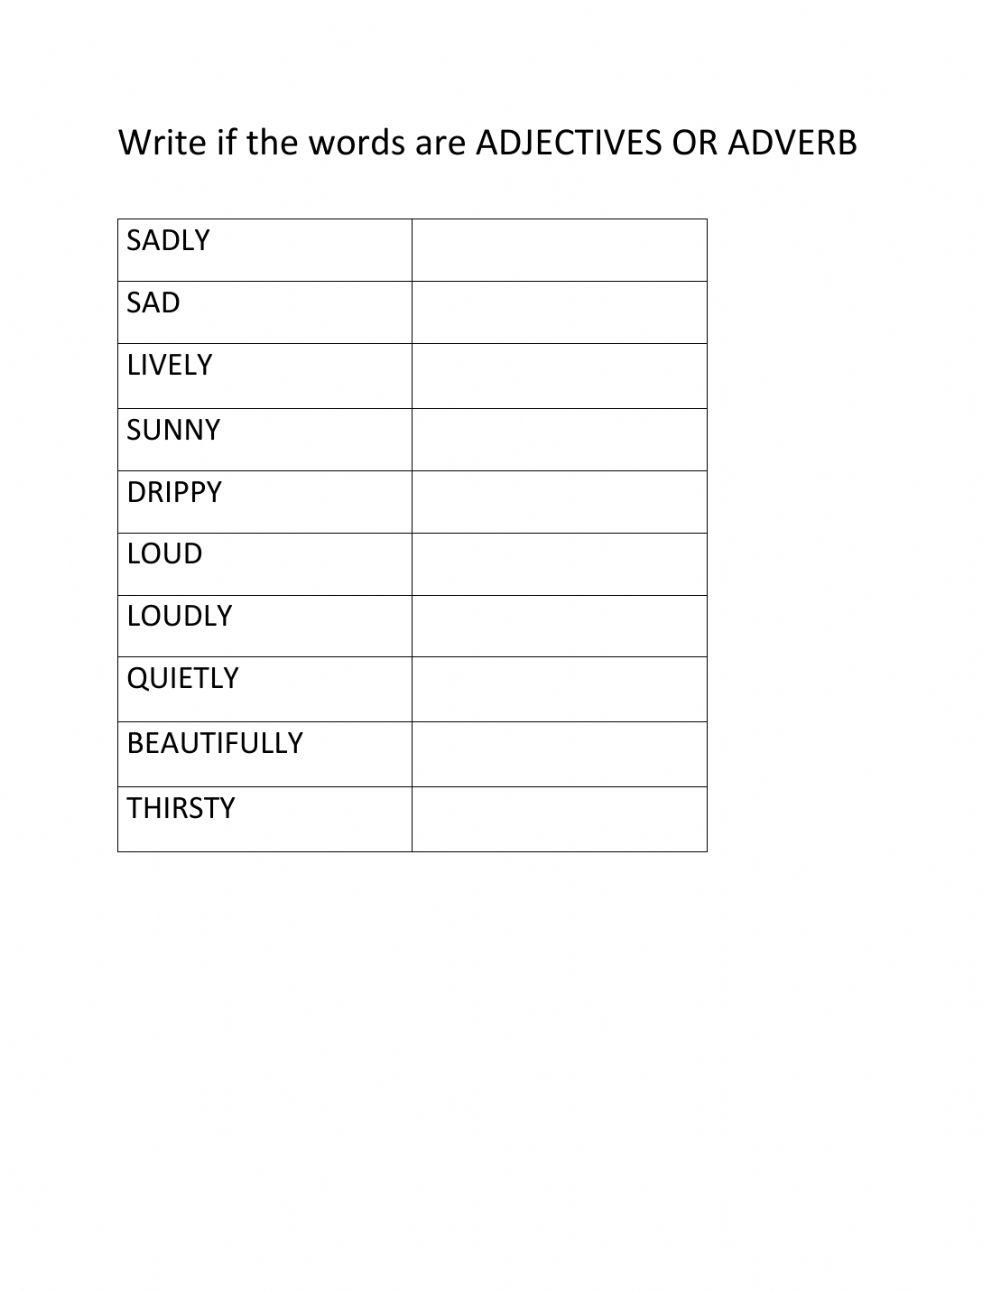 Adverbs and adjectives